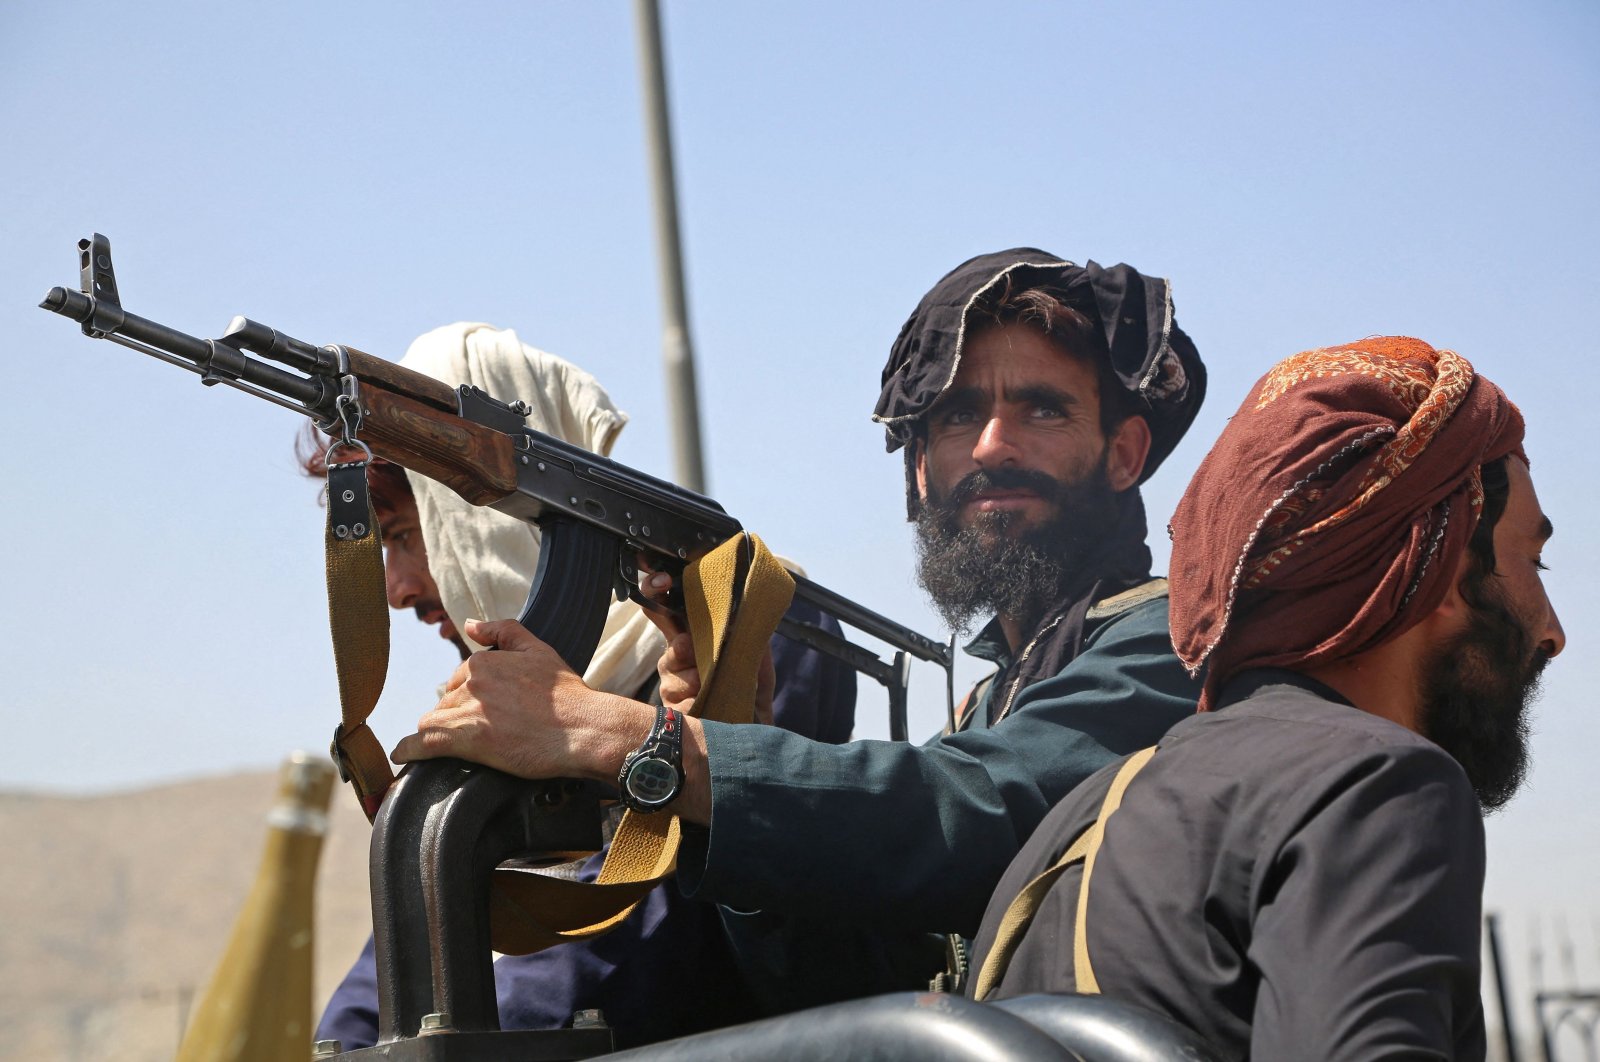 Taliban fighters stand guard in a vehicle along the roadside in Kabul, Afghanistan, Aug. 16, 2021. (AFP Photo)